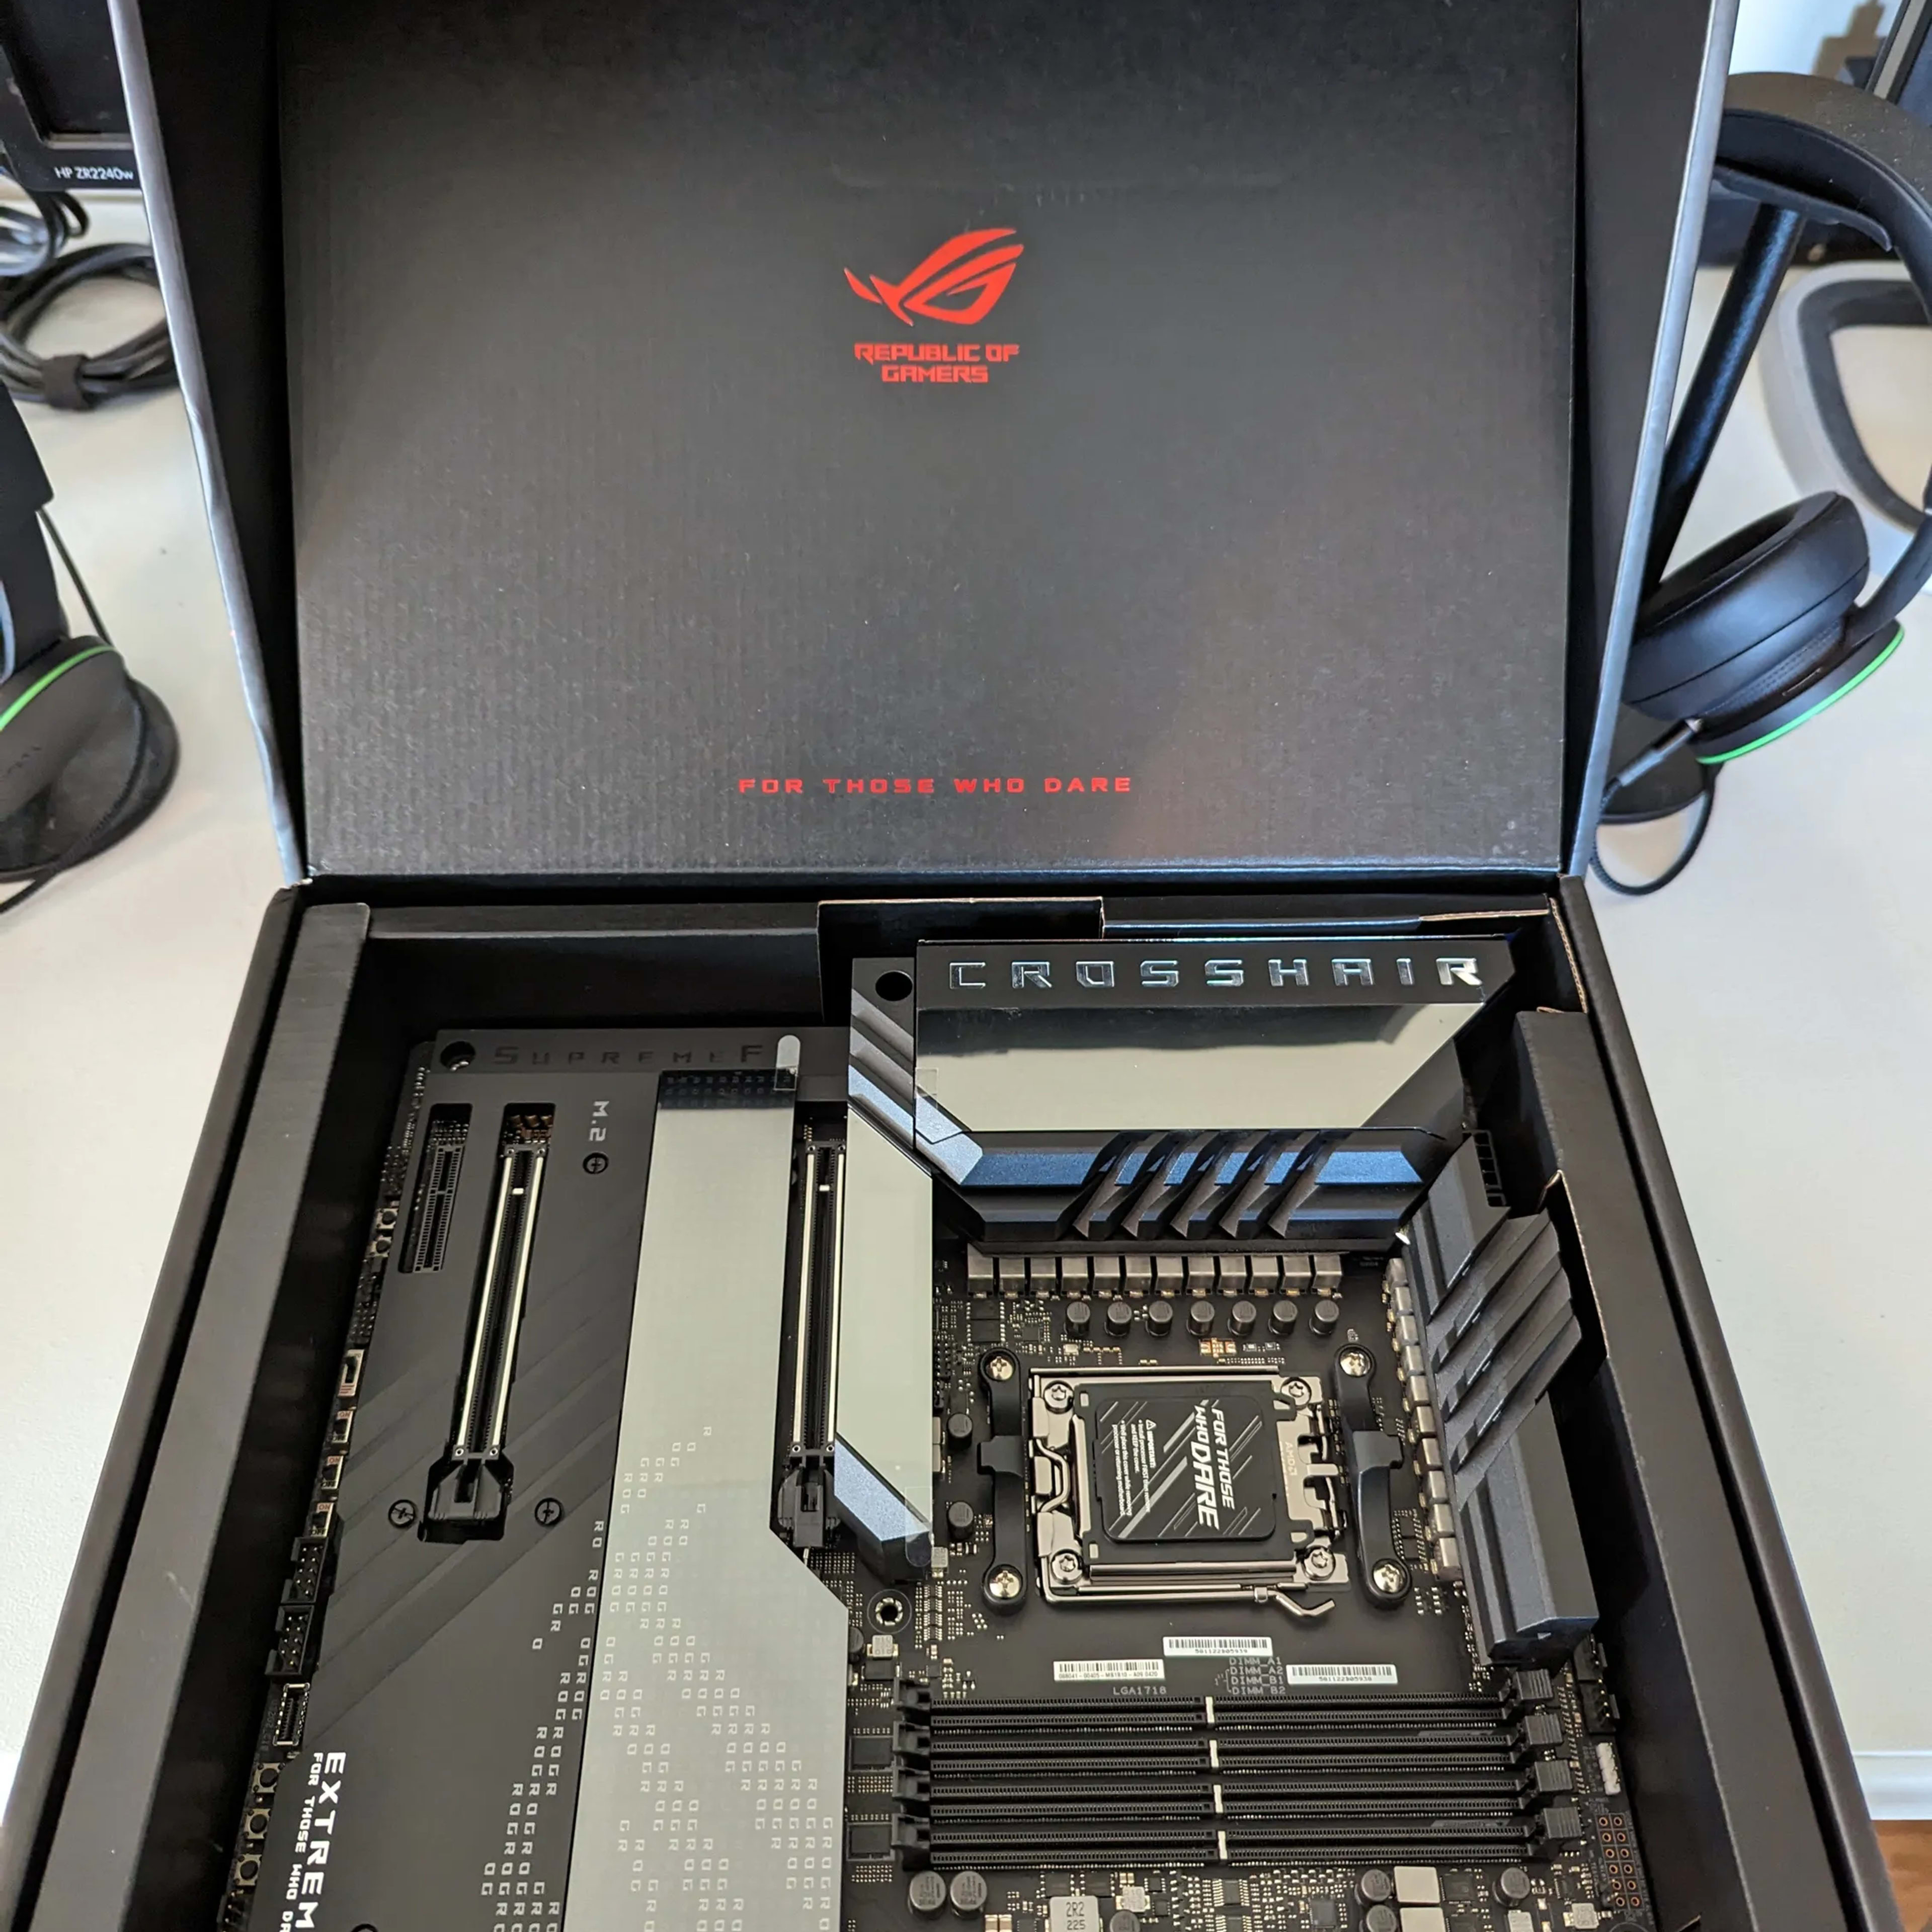 ASUS ROG CROSSHAIR X670E EXTREME MOTHERBOARD